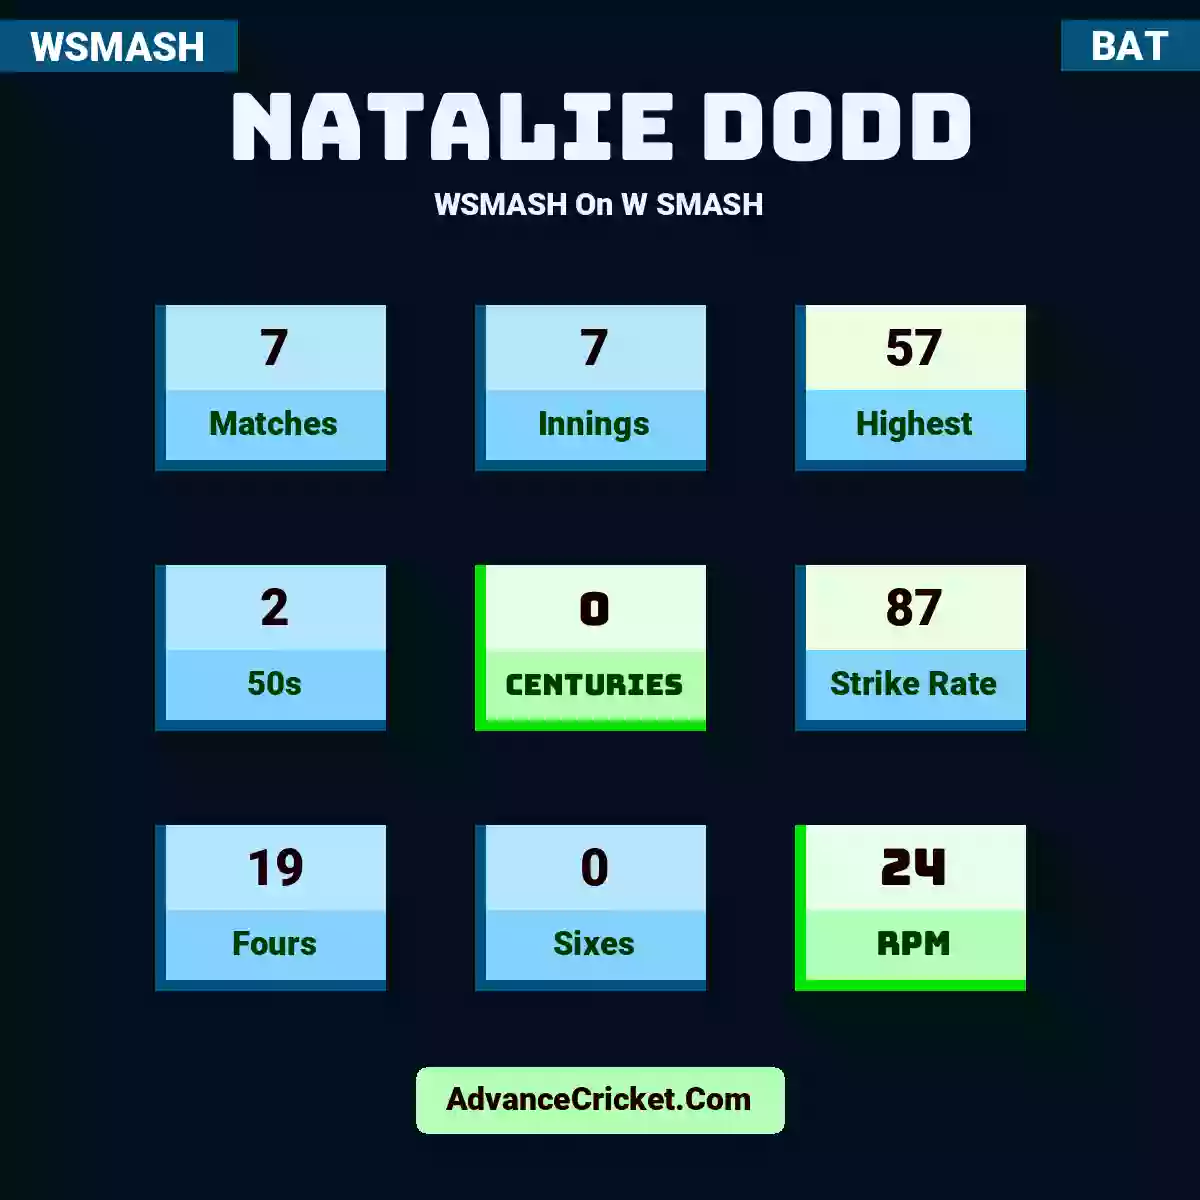 Natalie Dodd WSMASH  On W SMASH, Natalie Dodd played 7 matches, scored 57 runs as highest, 2 half-centuries, and 0 centuries, with a strike rate of 87. N.Dodd hit 19 fours and 0 sixes, with an RPM of 24.